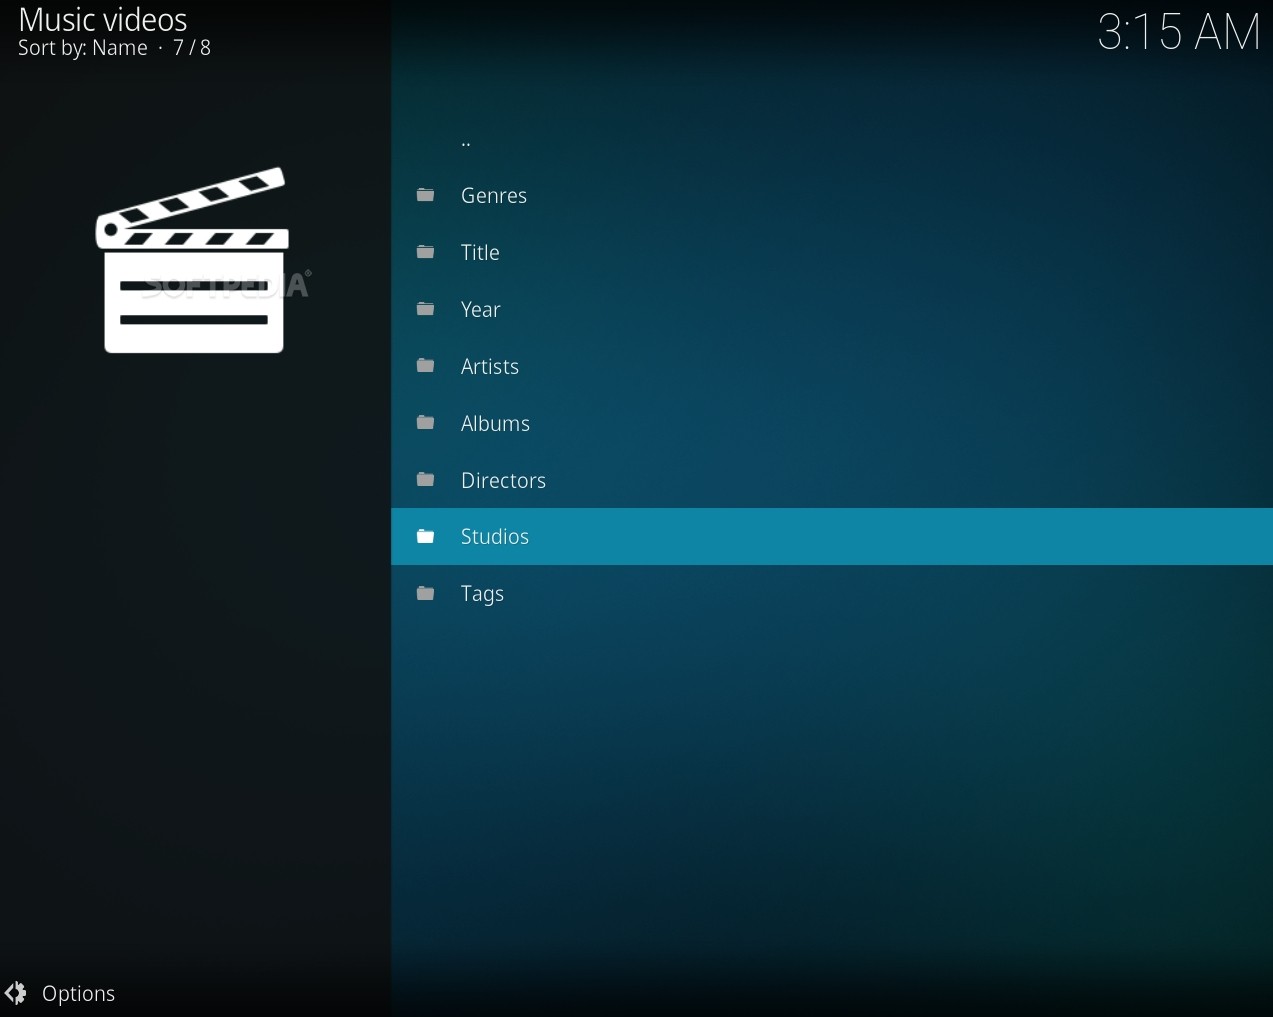 XBMC Media Center screenshot 3 - The application enables you to quickly analyze the system info and add as many profiles as you want